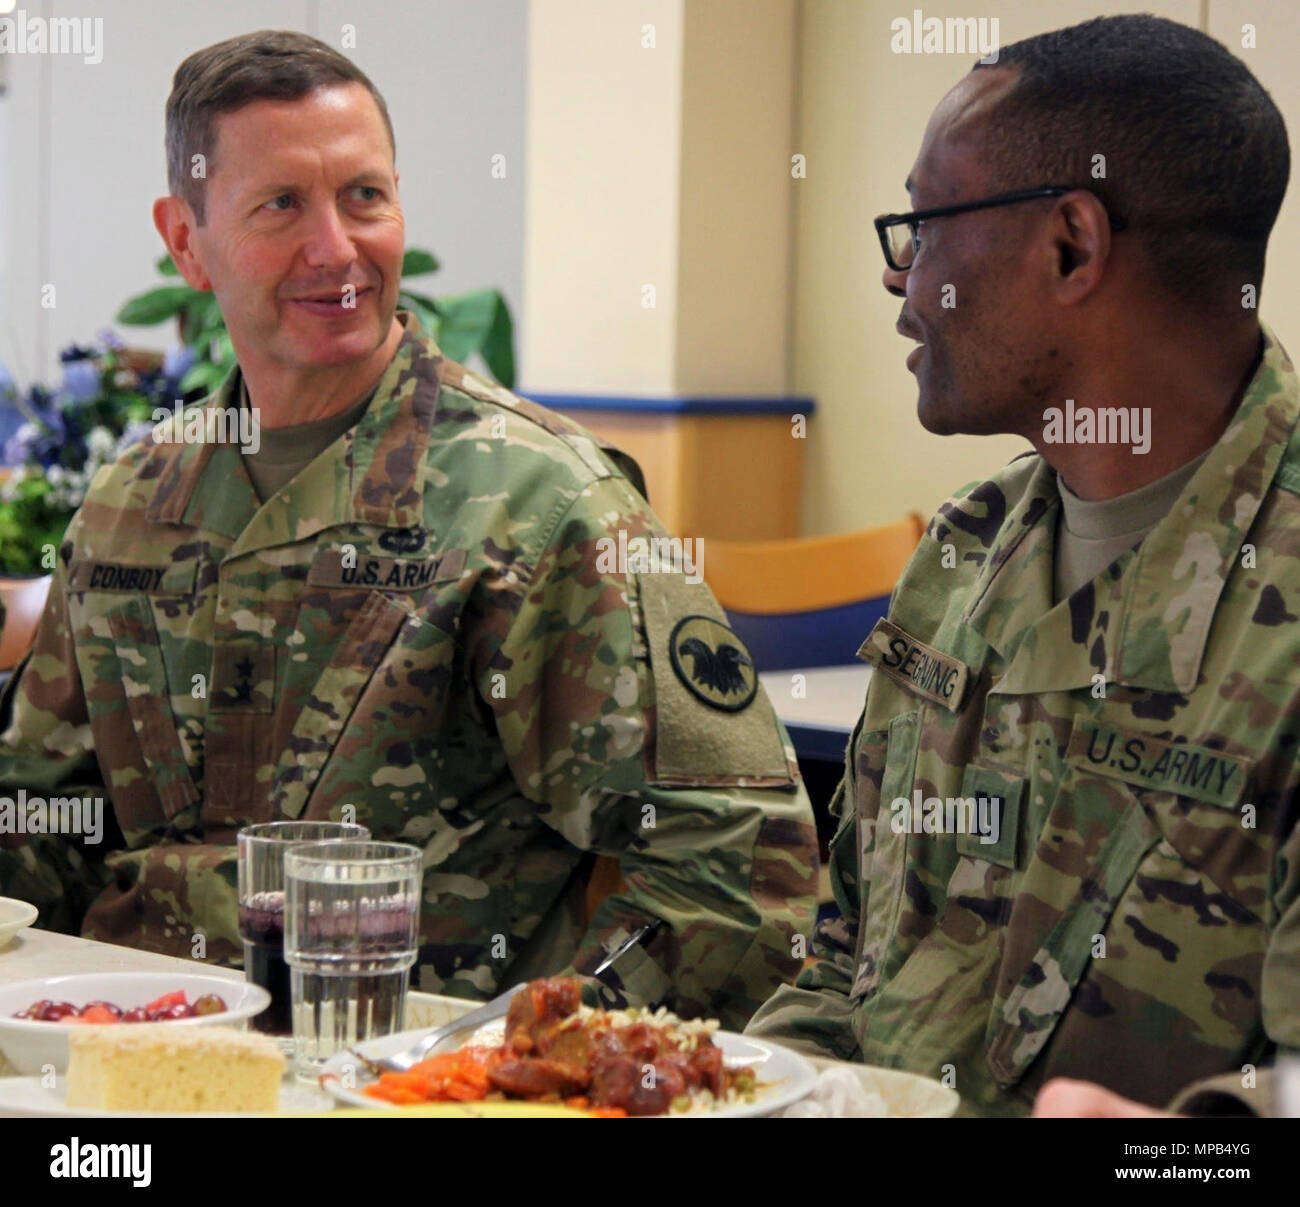 KAISERSLAUTERN, Germany – Maj. Gen. David Conboy, deputy commanding general  - operations, United States Army Reserve Command, speaks with Capt. Jean  Segning, logistics officer, 7th Mission Support Command, April 8 at the